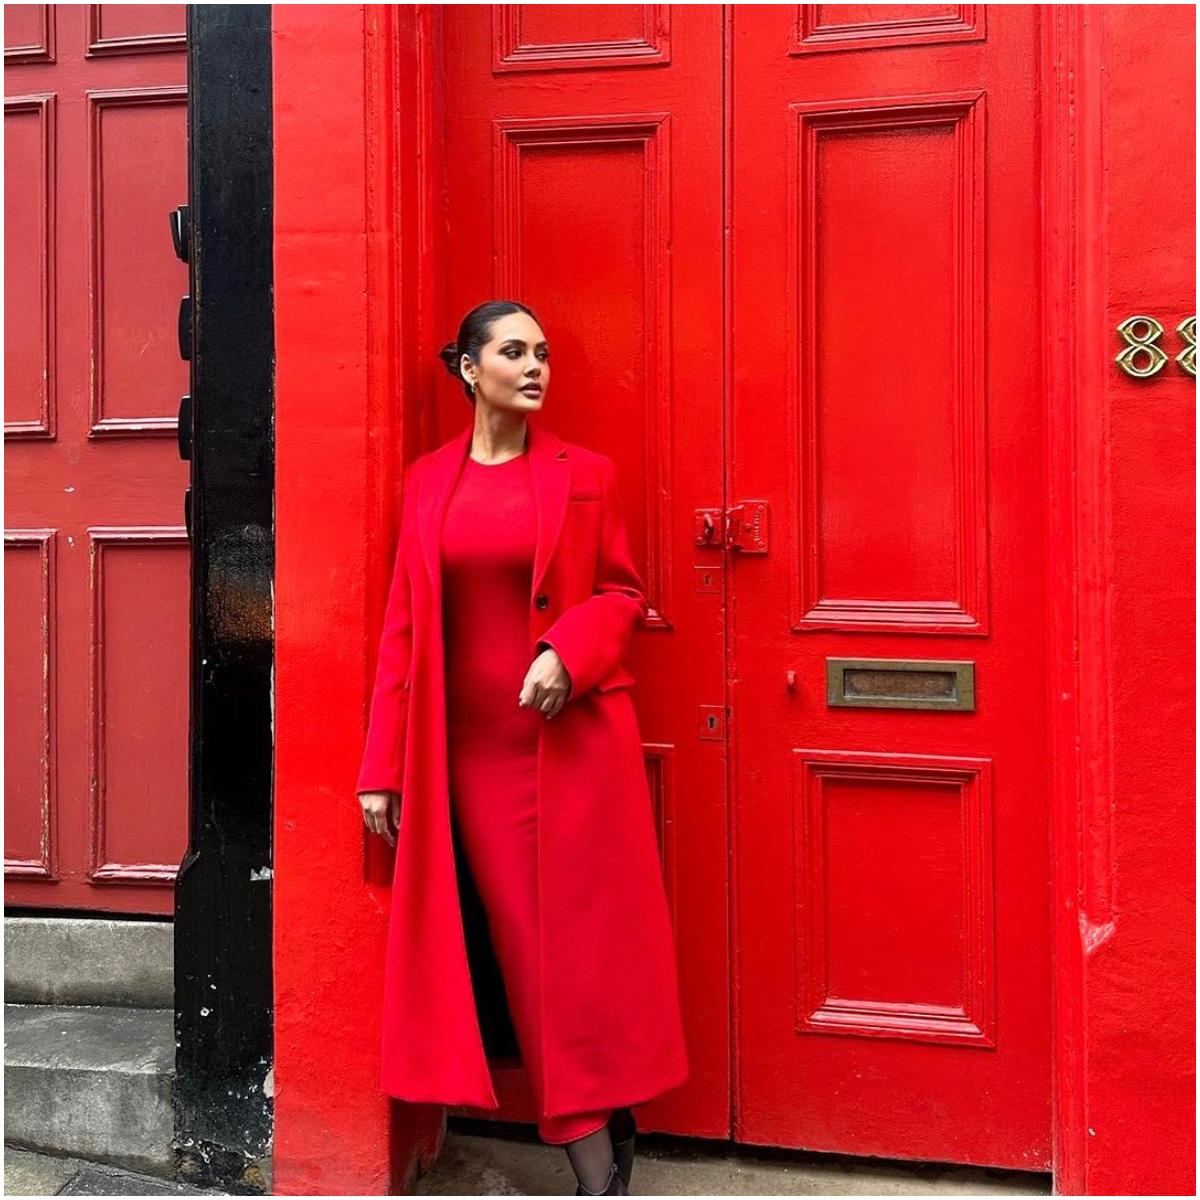 Posing against a red backdrop in a red outfit can be risky, but Esha shows us how it is done without blending in